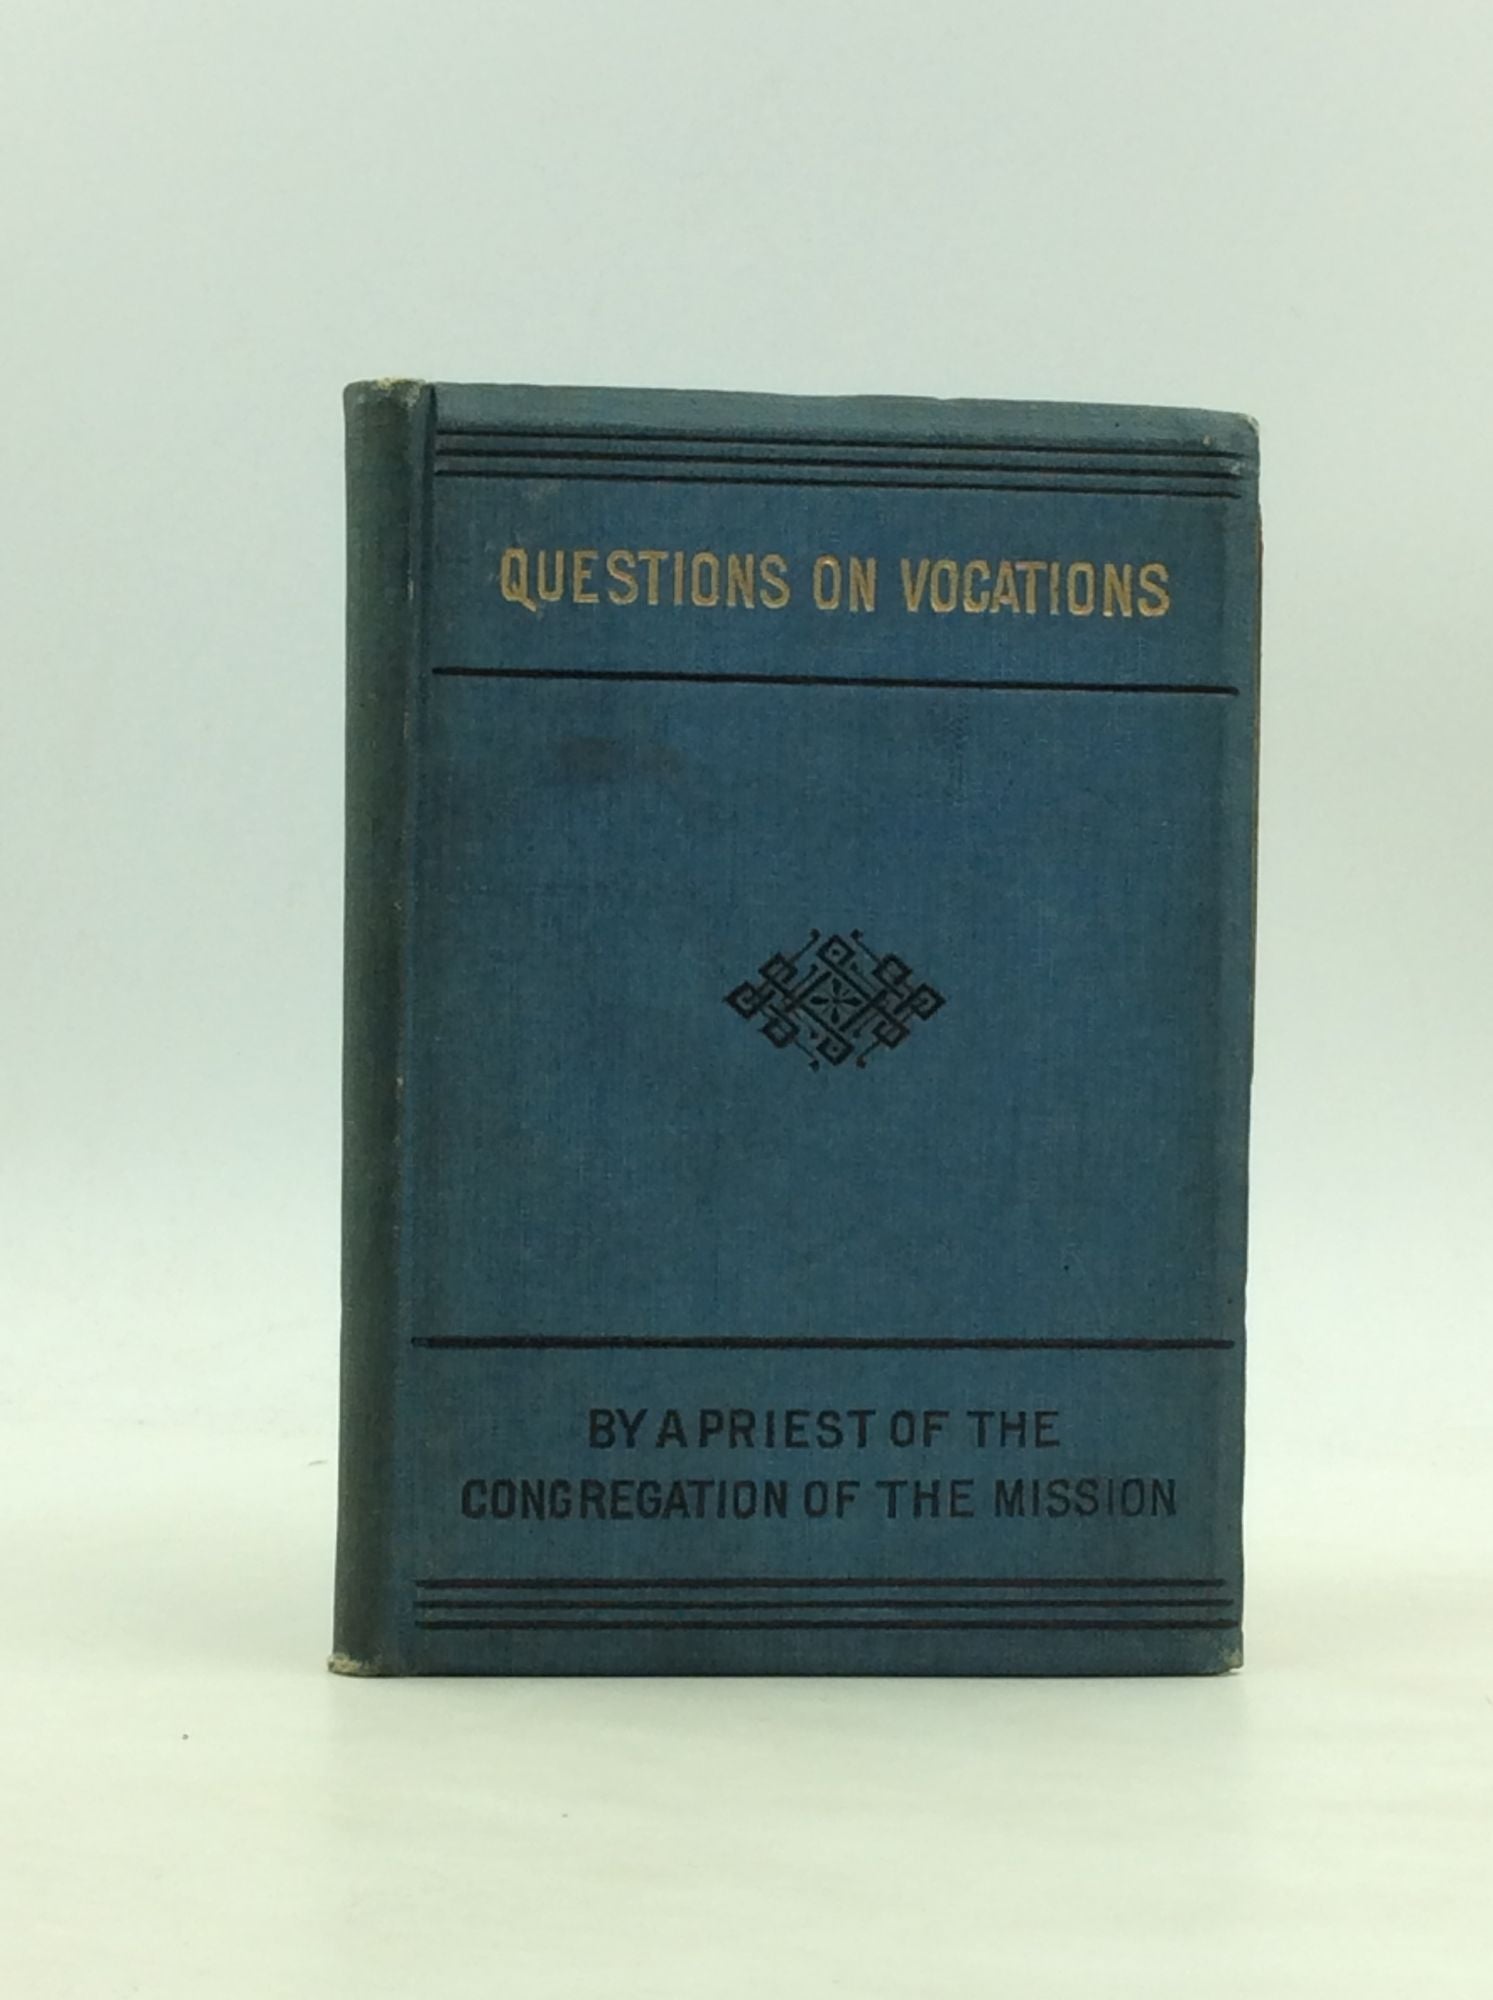 A priest of the congregation of the mission - Questions on Vocations: A Catechism Principally for Parochial Schools, Academies and Colleges